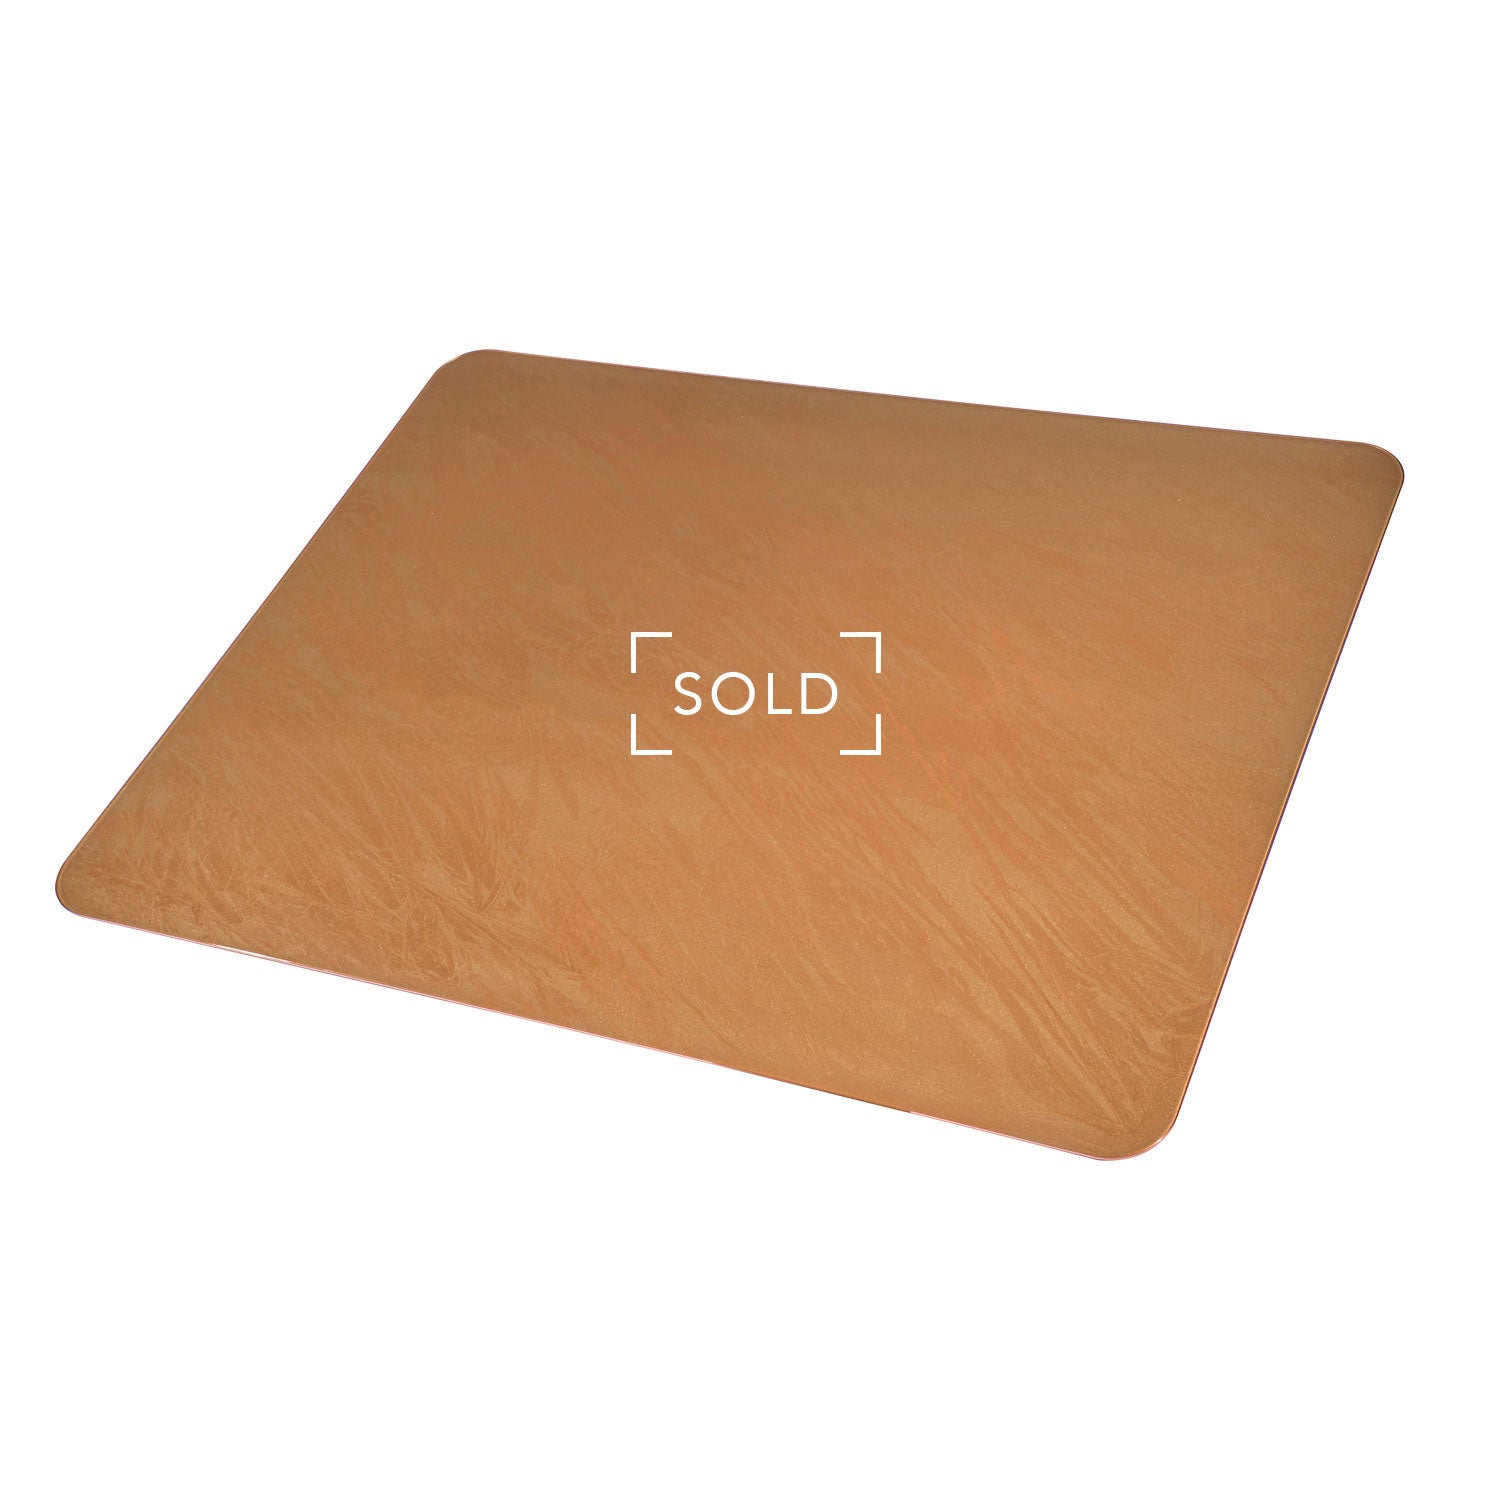 Bitcoined Brilliance Chair Mats 46inx60in